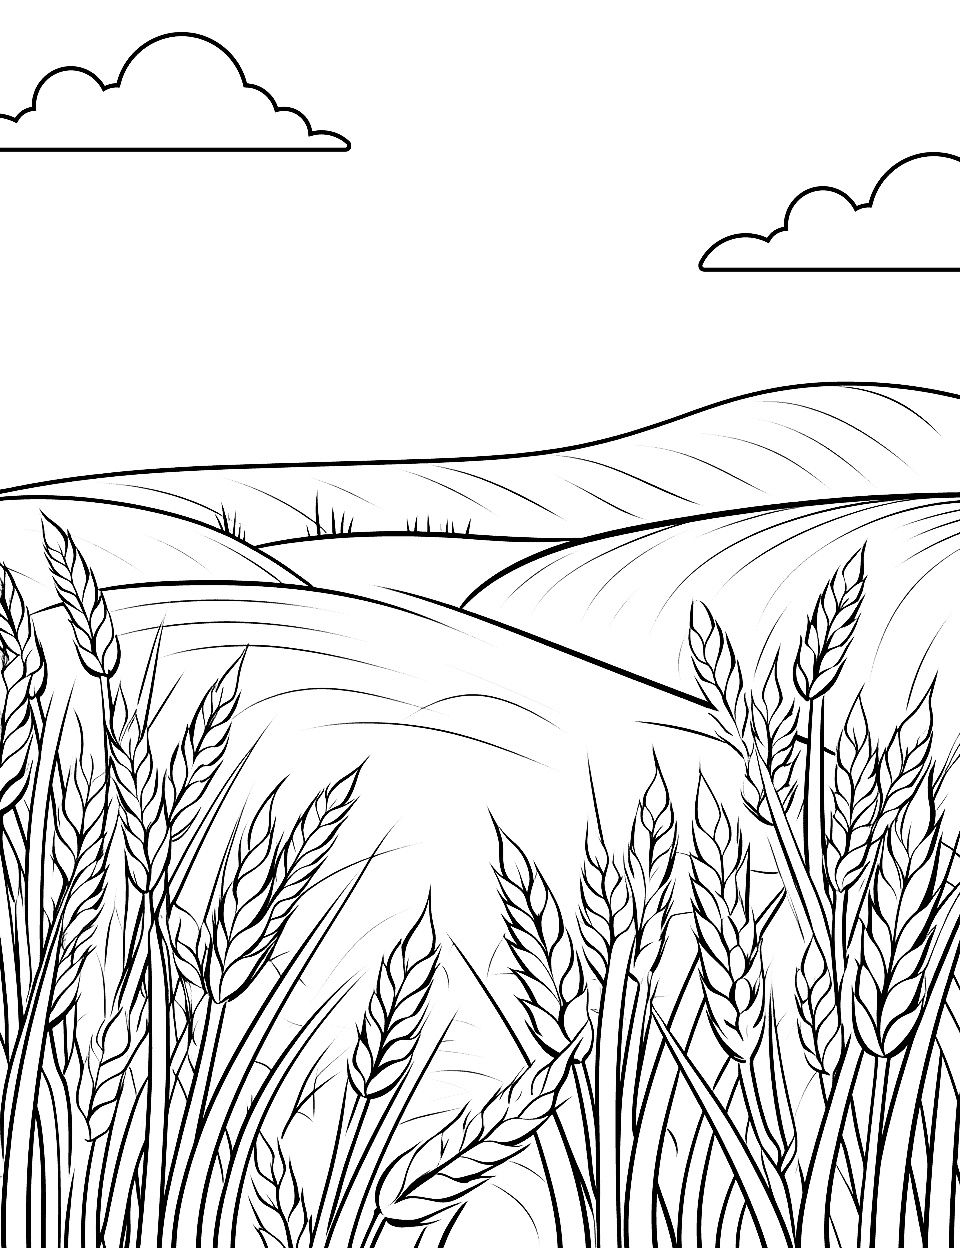 Golden Wheat Field Nature Coloring Page - A golden wheat field ready for harvest, with a clear sky above.